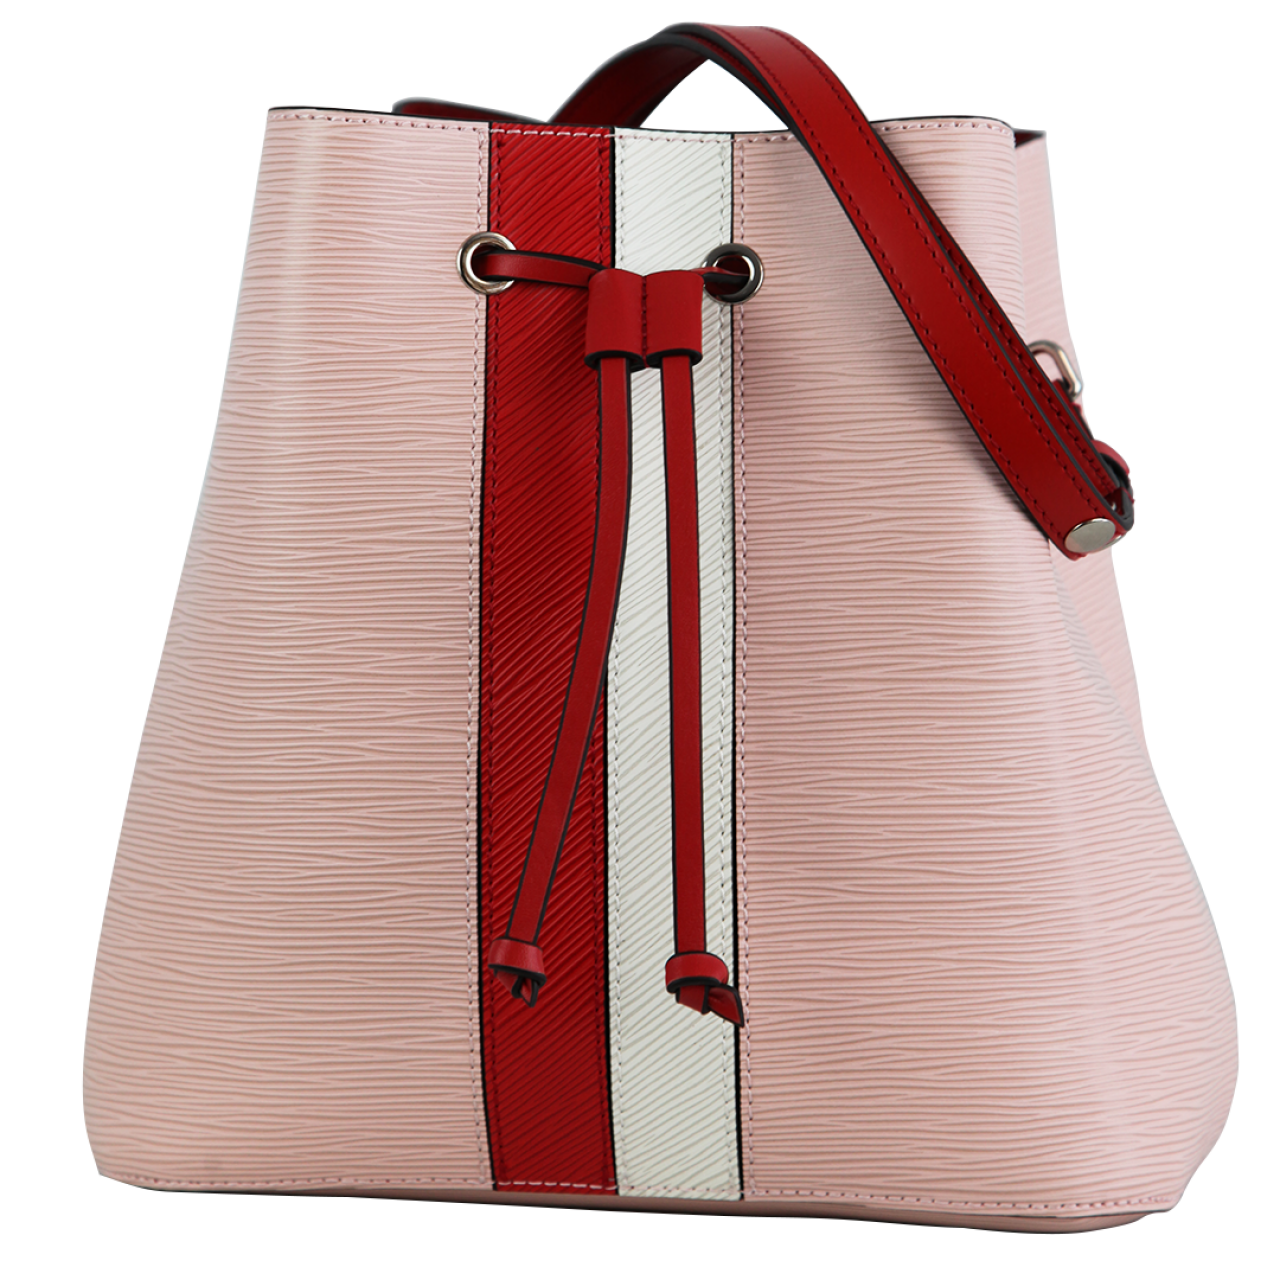 Zeekas Brand Women Stylish Solid Tote Bag Shoulder Strap Sling Bucket Pattern Drawstring Bag Pink With Red And White